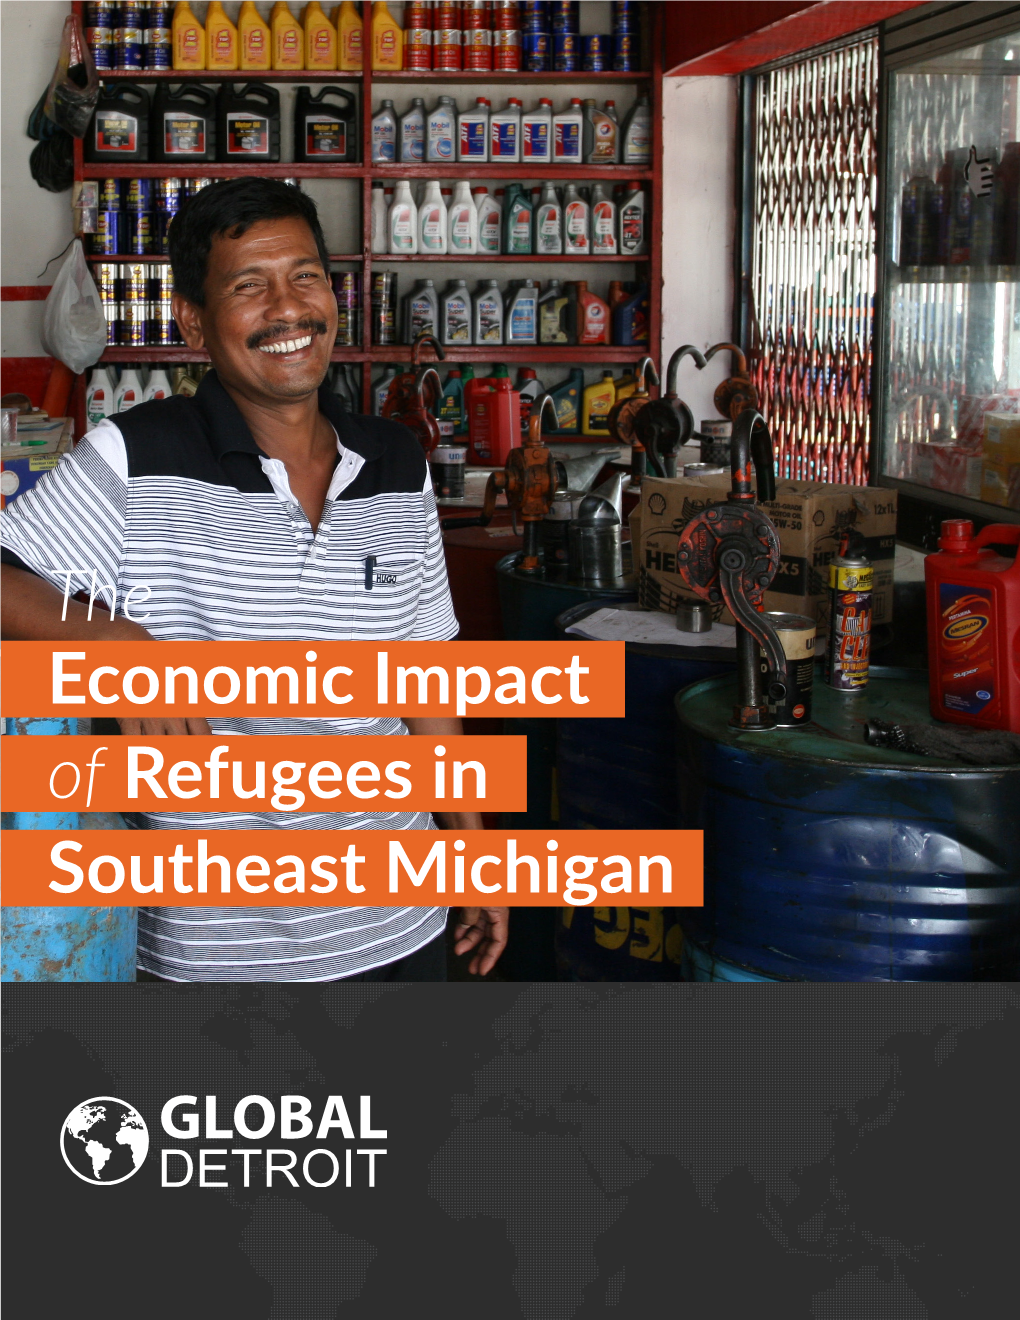 Economic Impact of Refugees in Southeast Michigan the Economic Impact of Refugees in Southeast Michigan